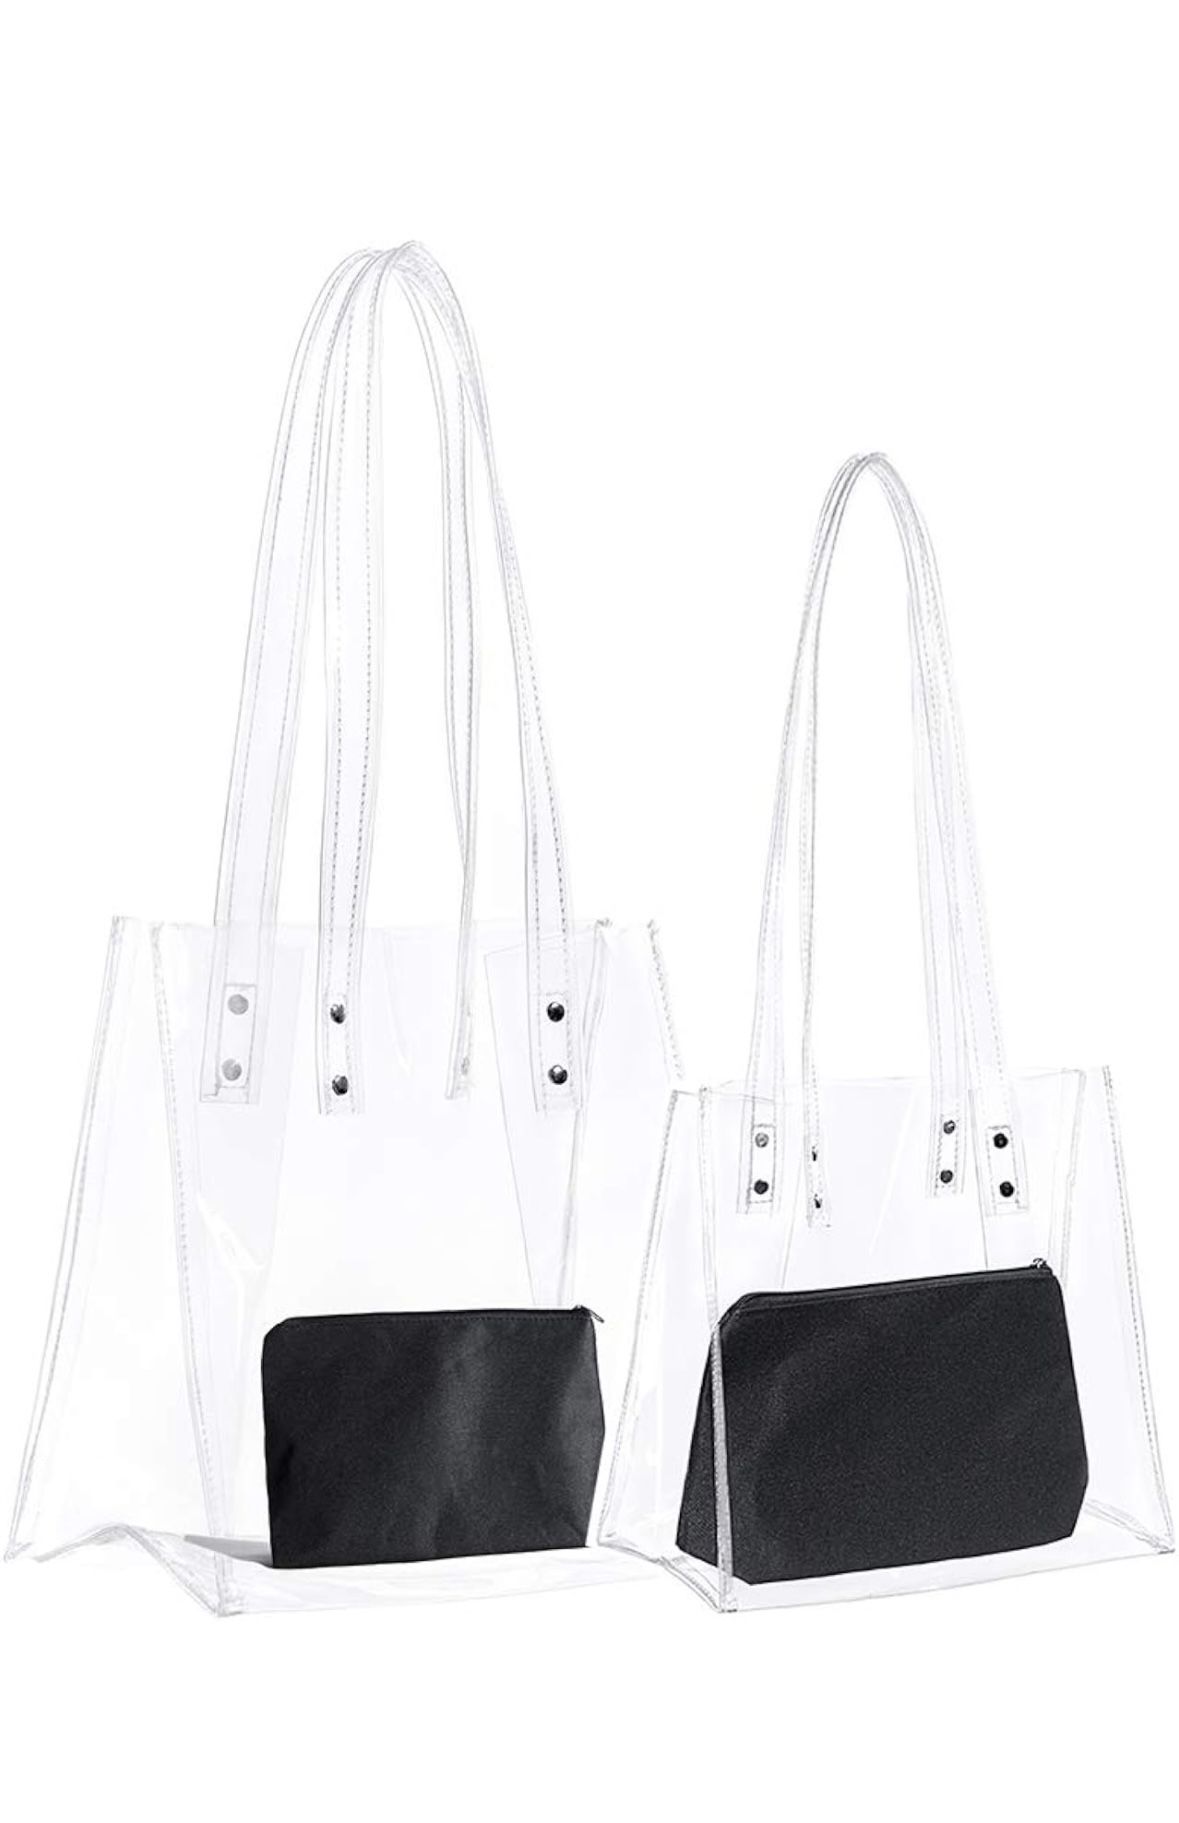 2 heavy duty clear tote bag and 2 black purses